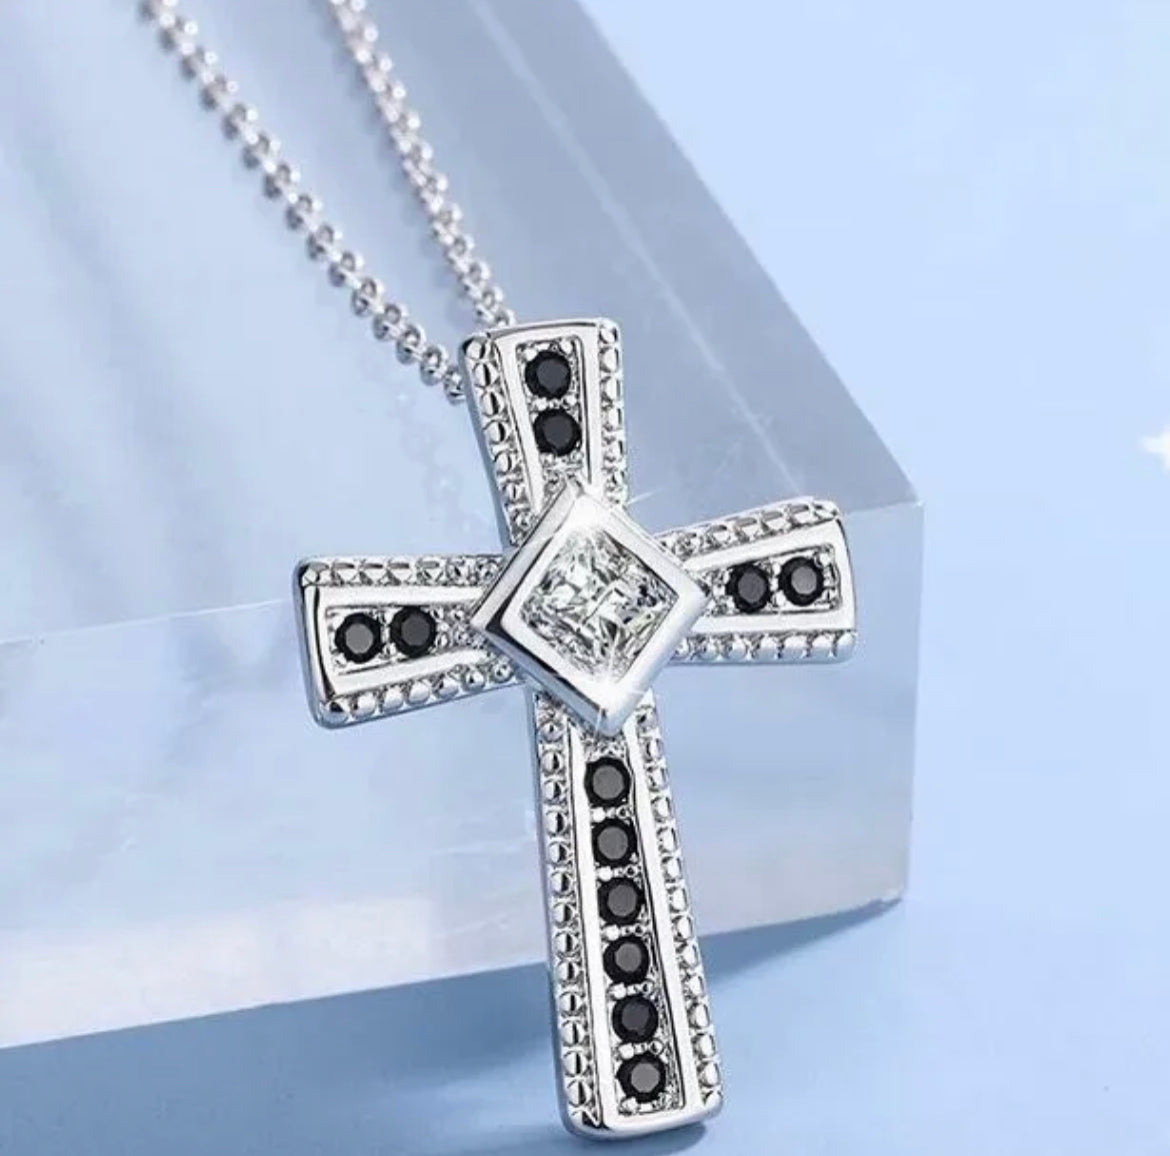 Crystal Cross Necklace